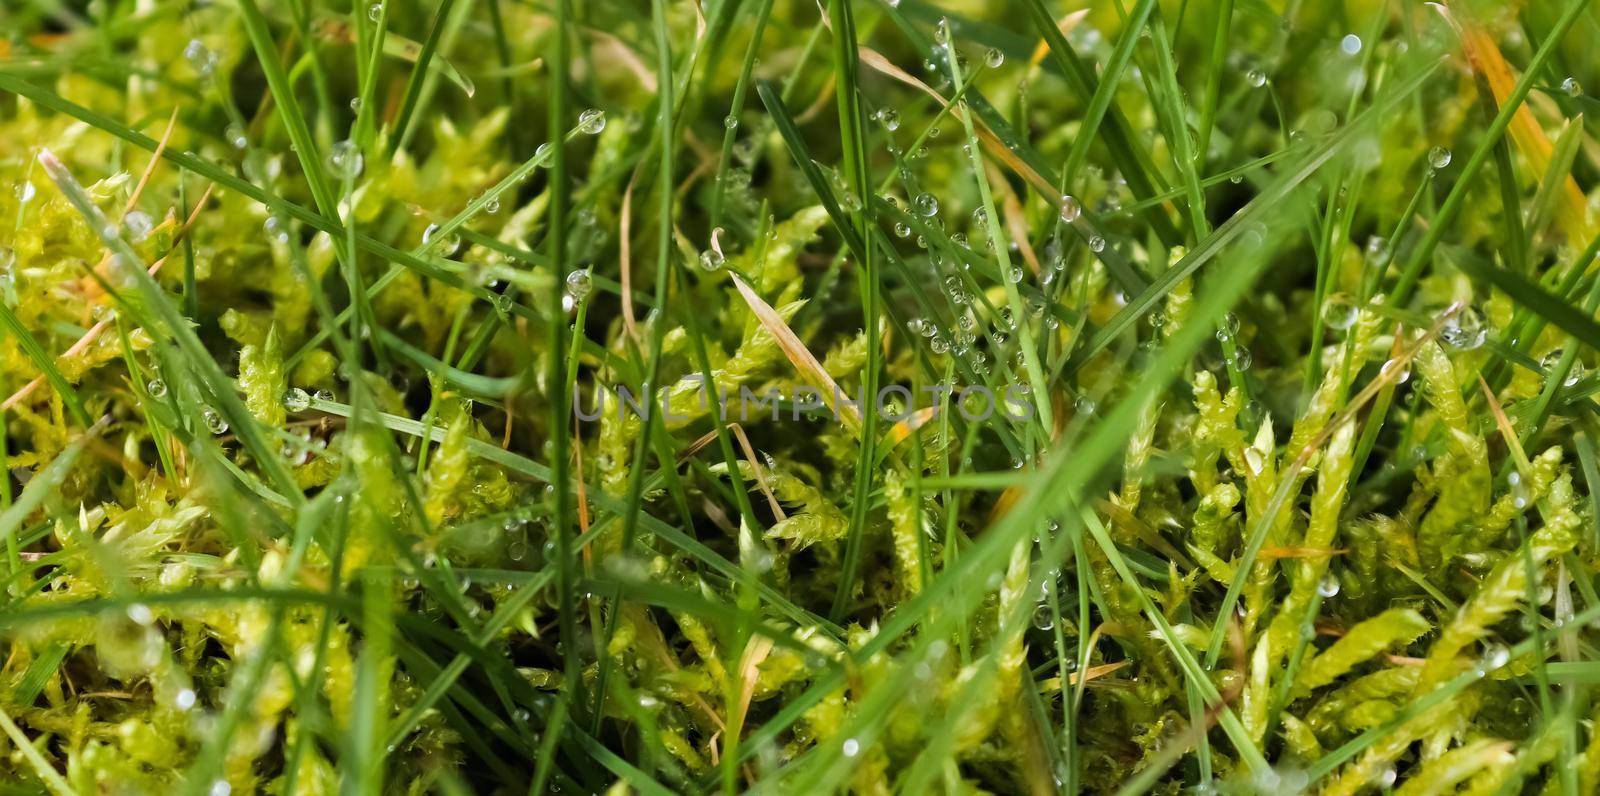 Fresh rain drops in close up view on green grass and plants